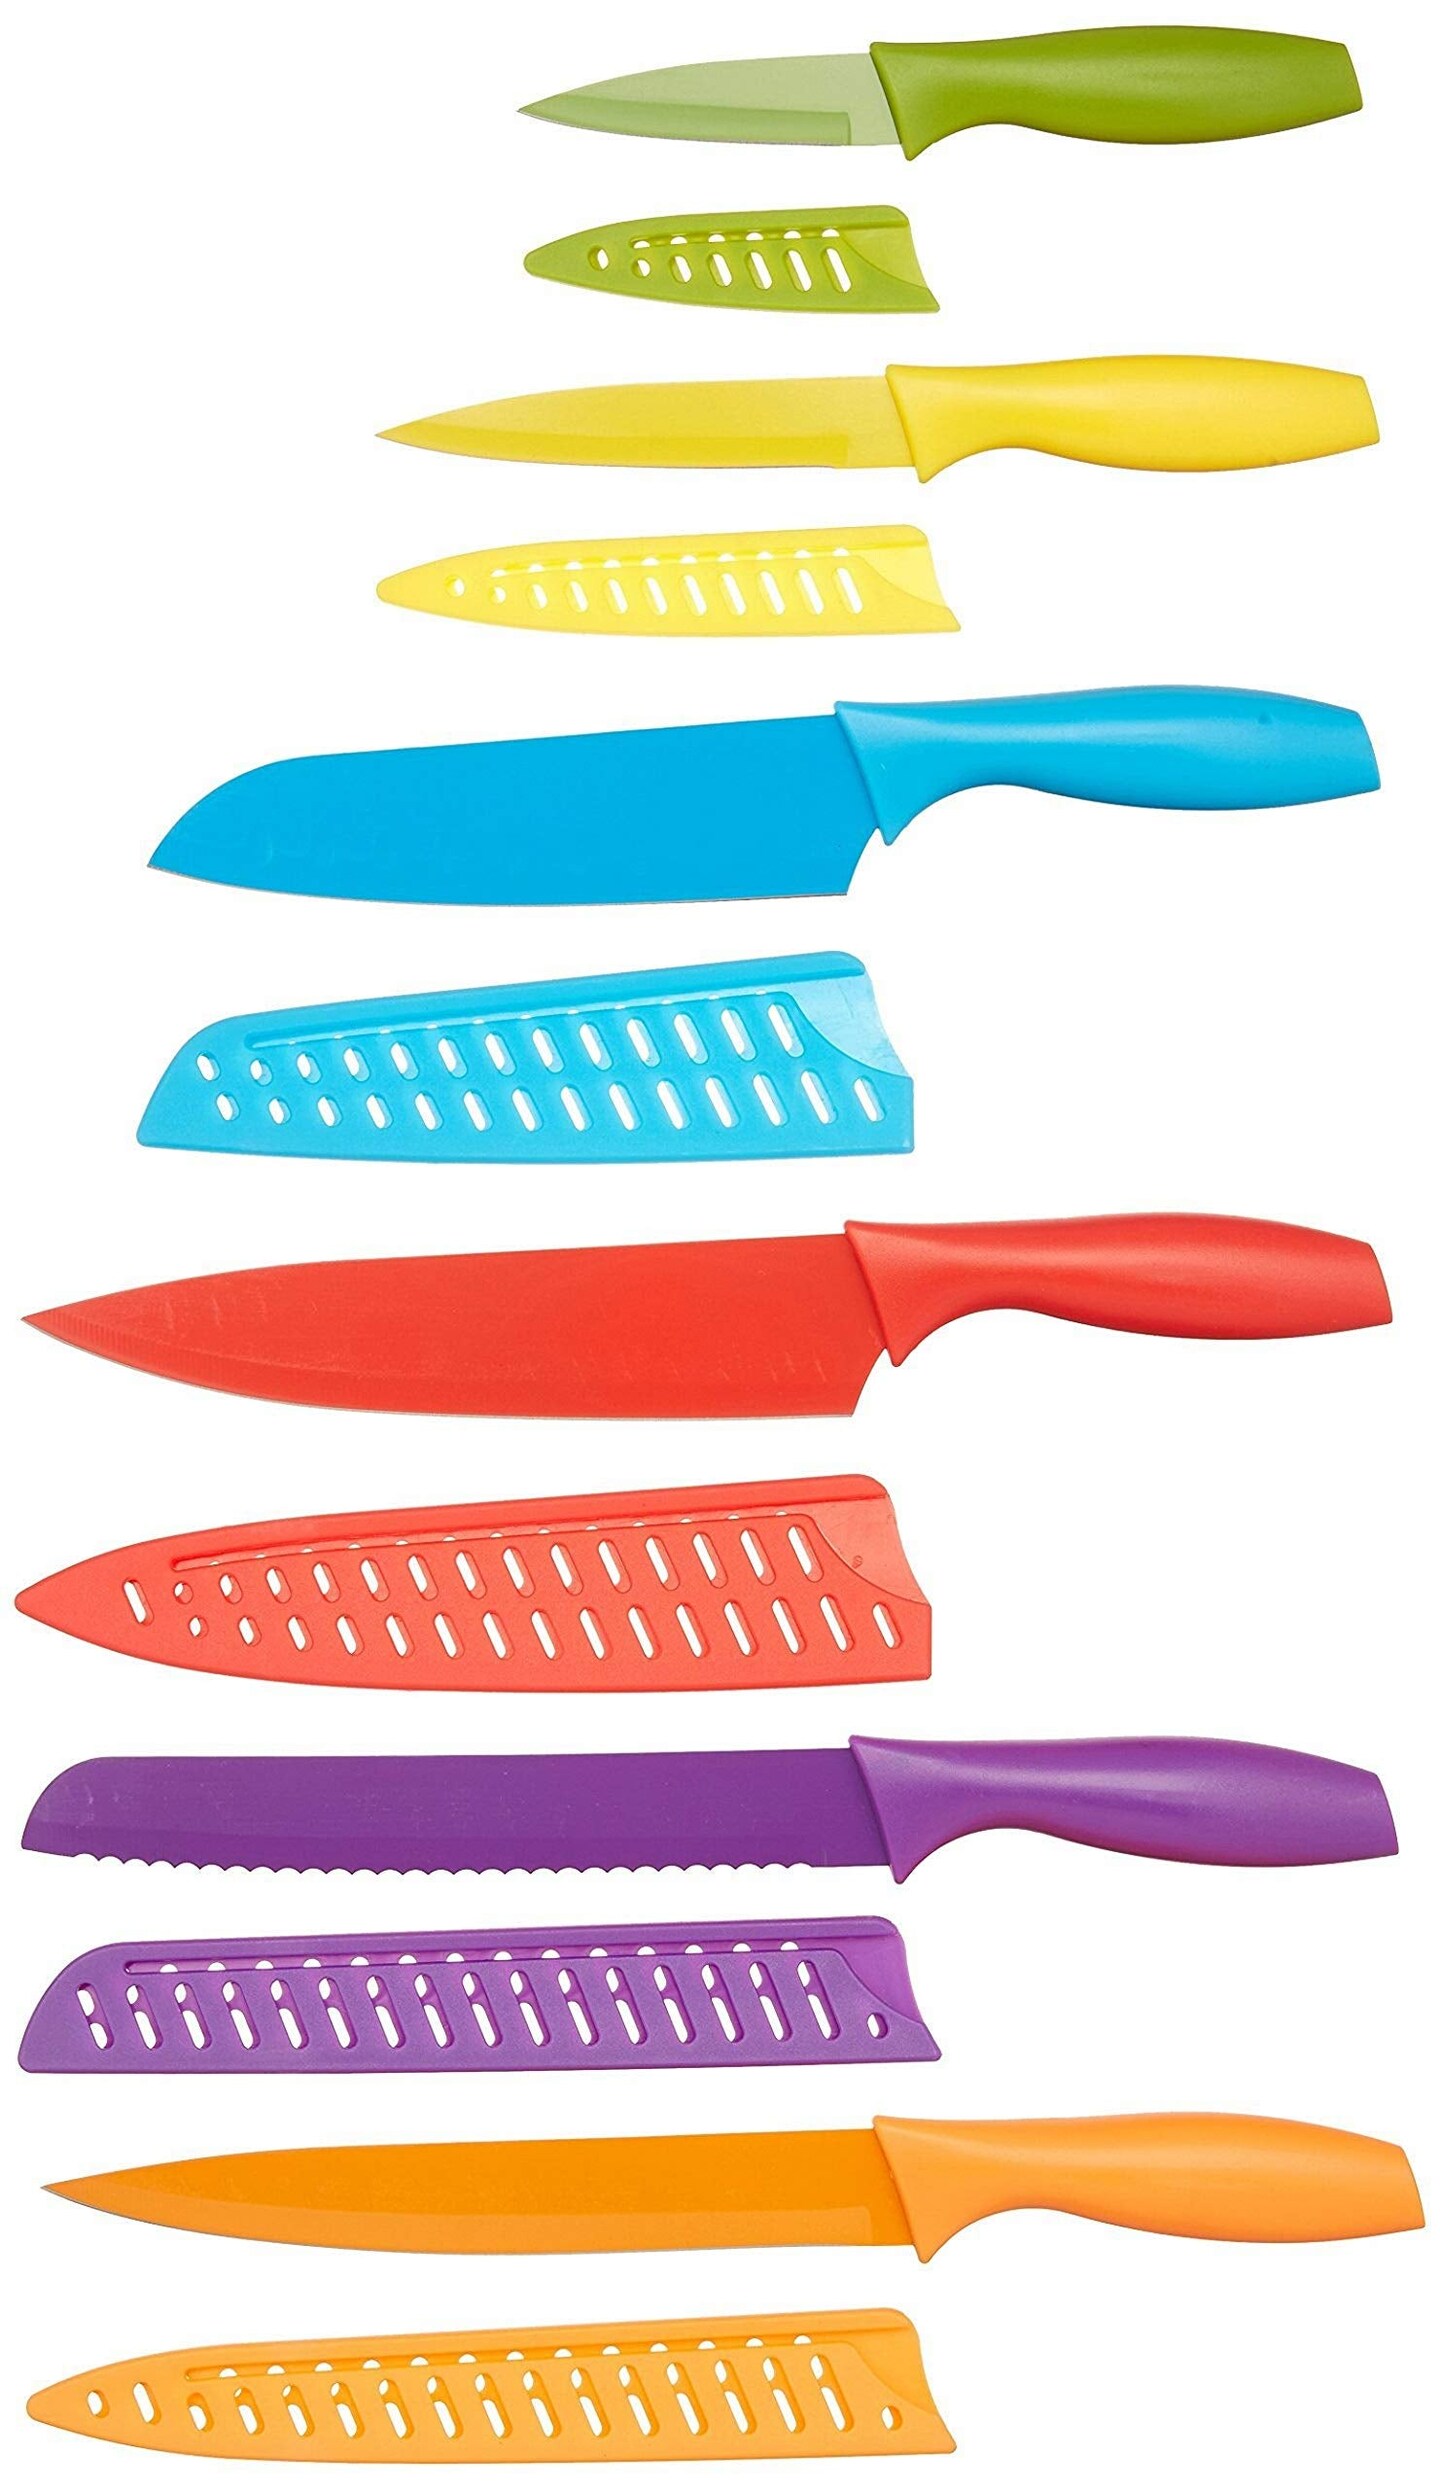 12 Piece Color Knife Set with Blade Guards